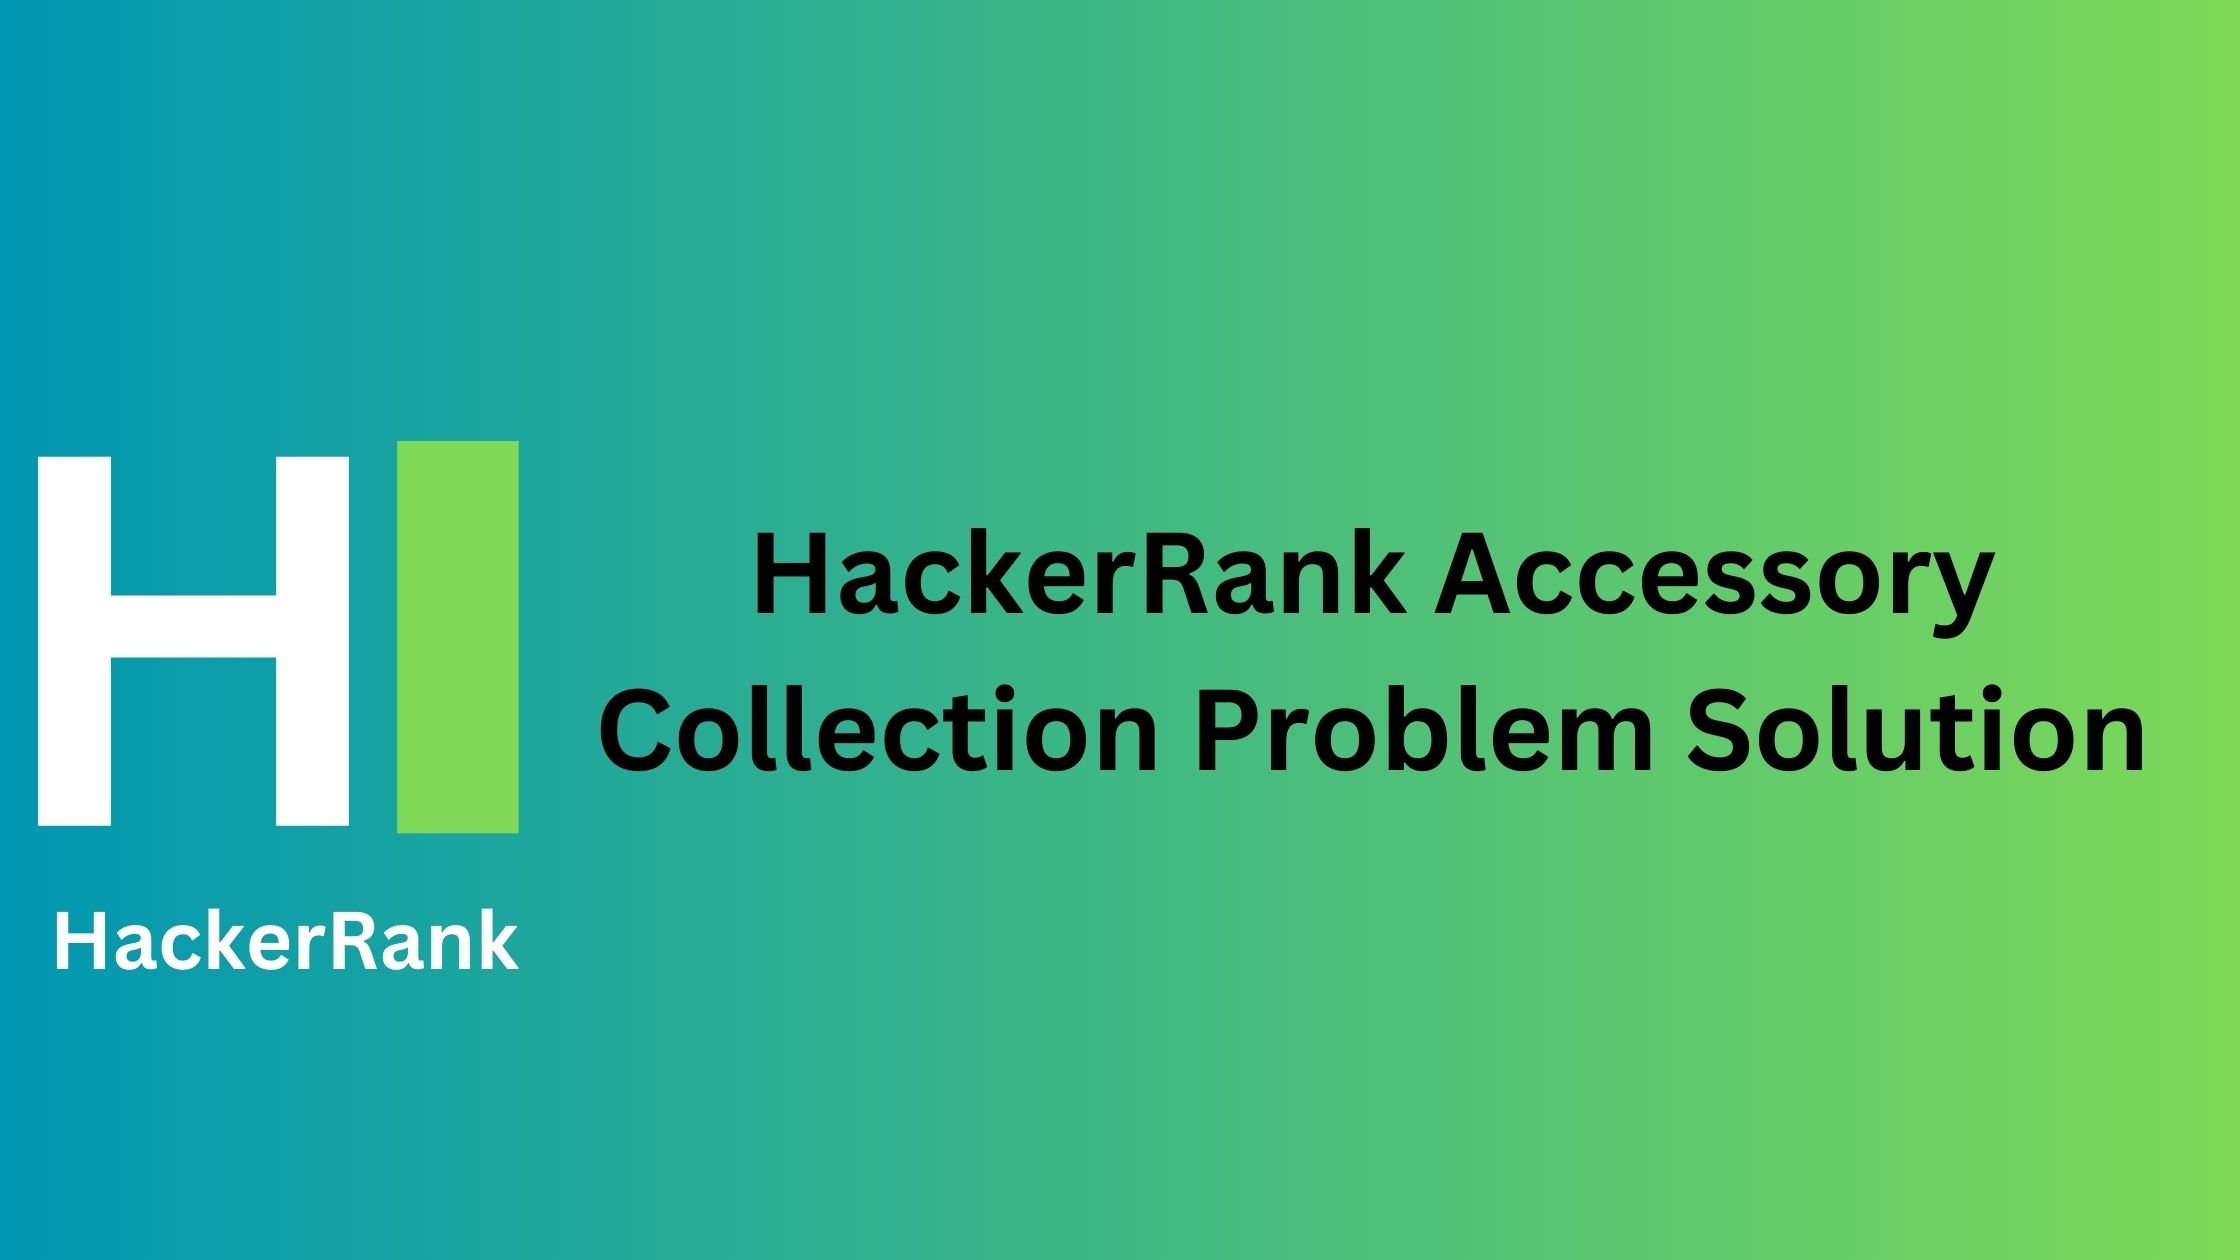 HackerRank Accessory Collection Problem Solution